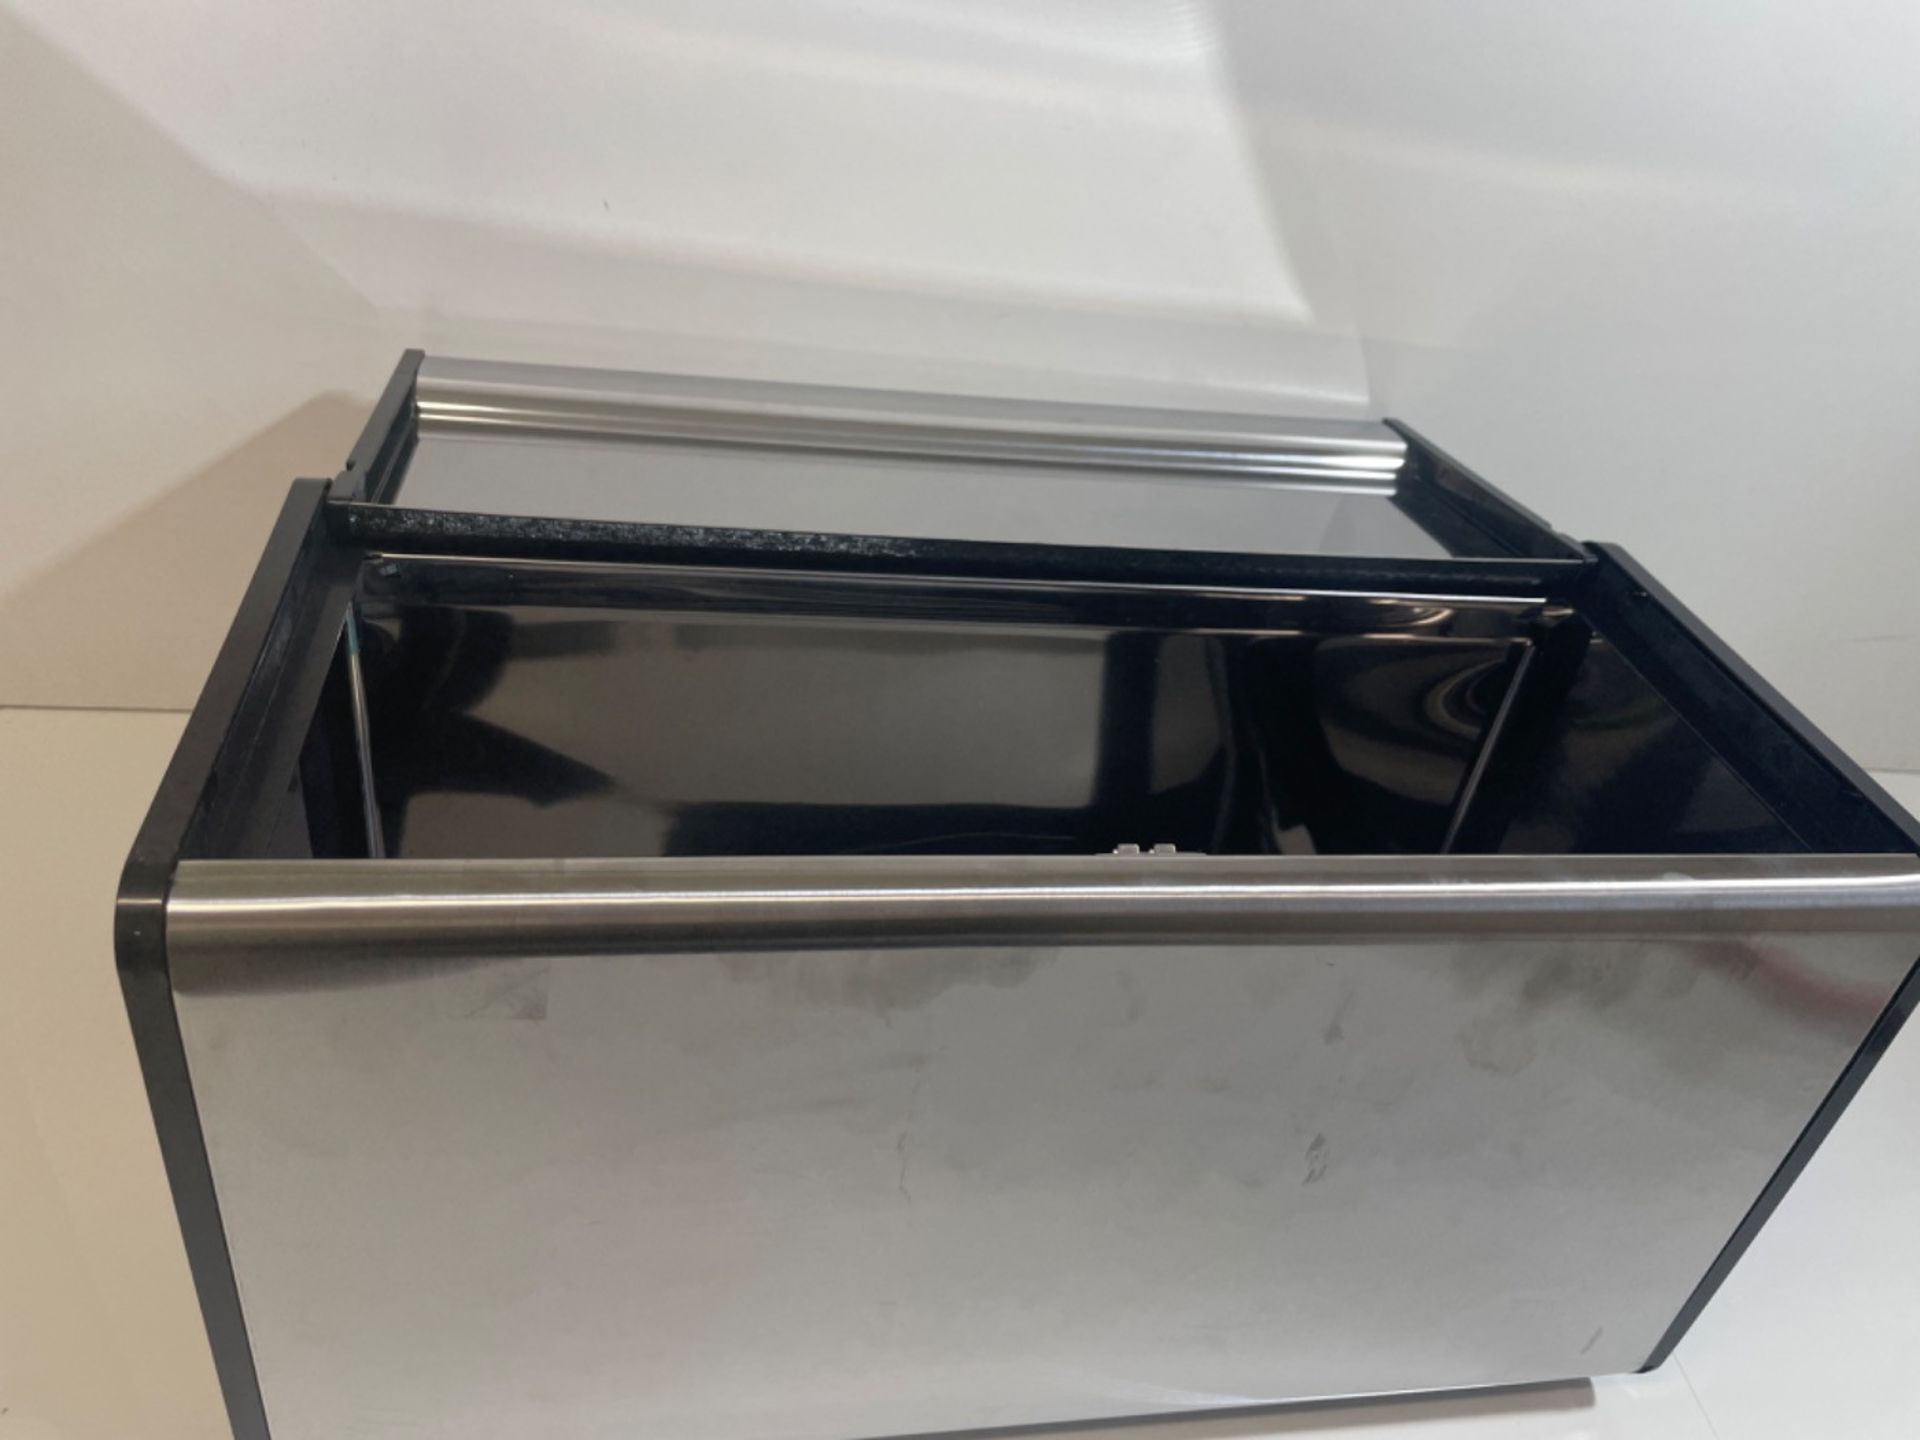 Daewoo Glace Noir Stainless Steel Bin With Stay Fresh Closing System, Ideal For Storing Bread, Ro... - Image 2 of 3